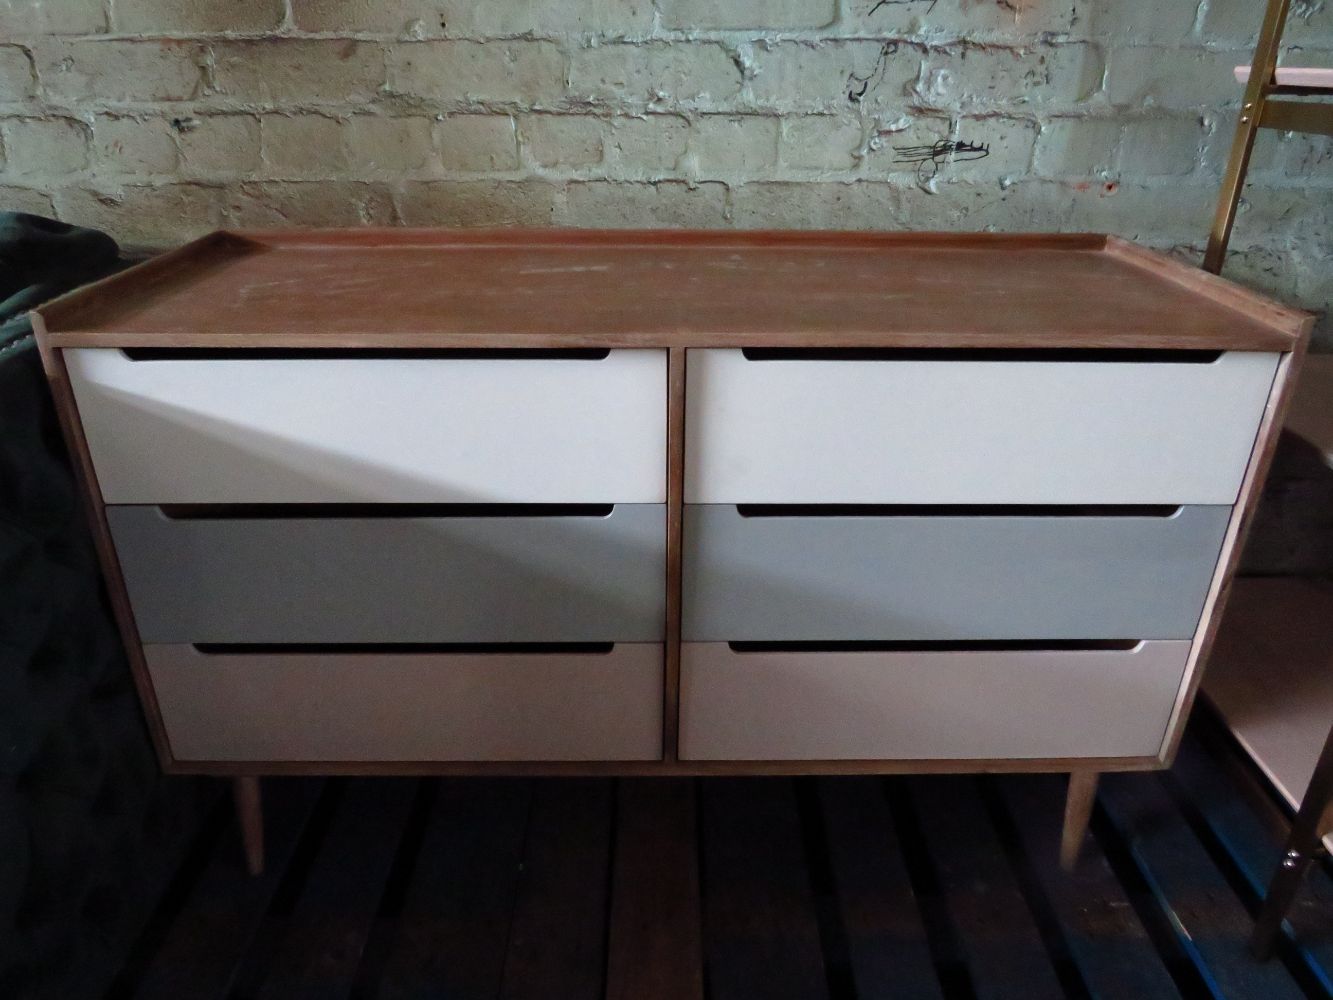 Furniture from Swoon, Heals, Cotswold and more